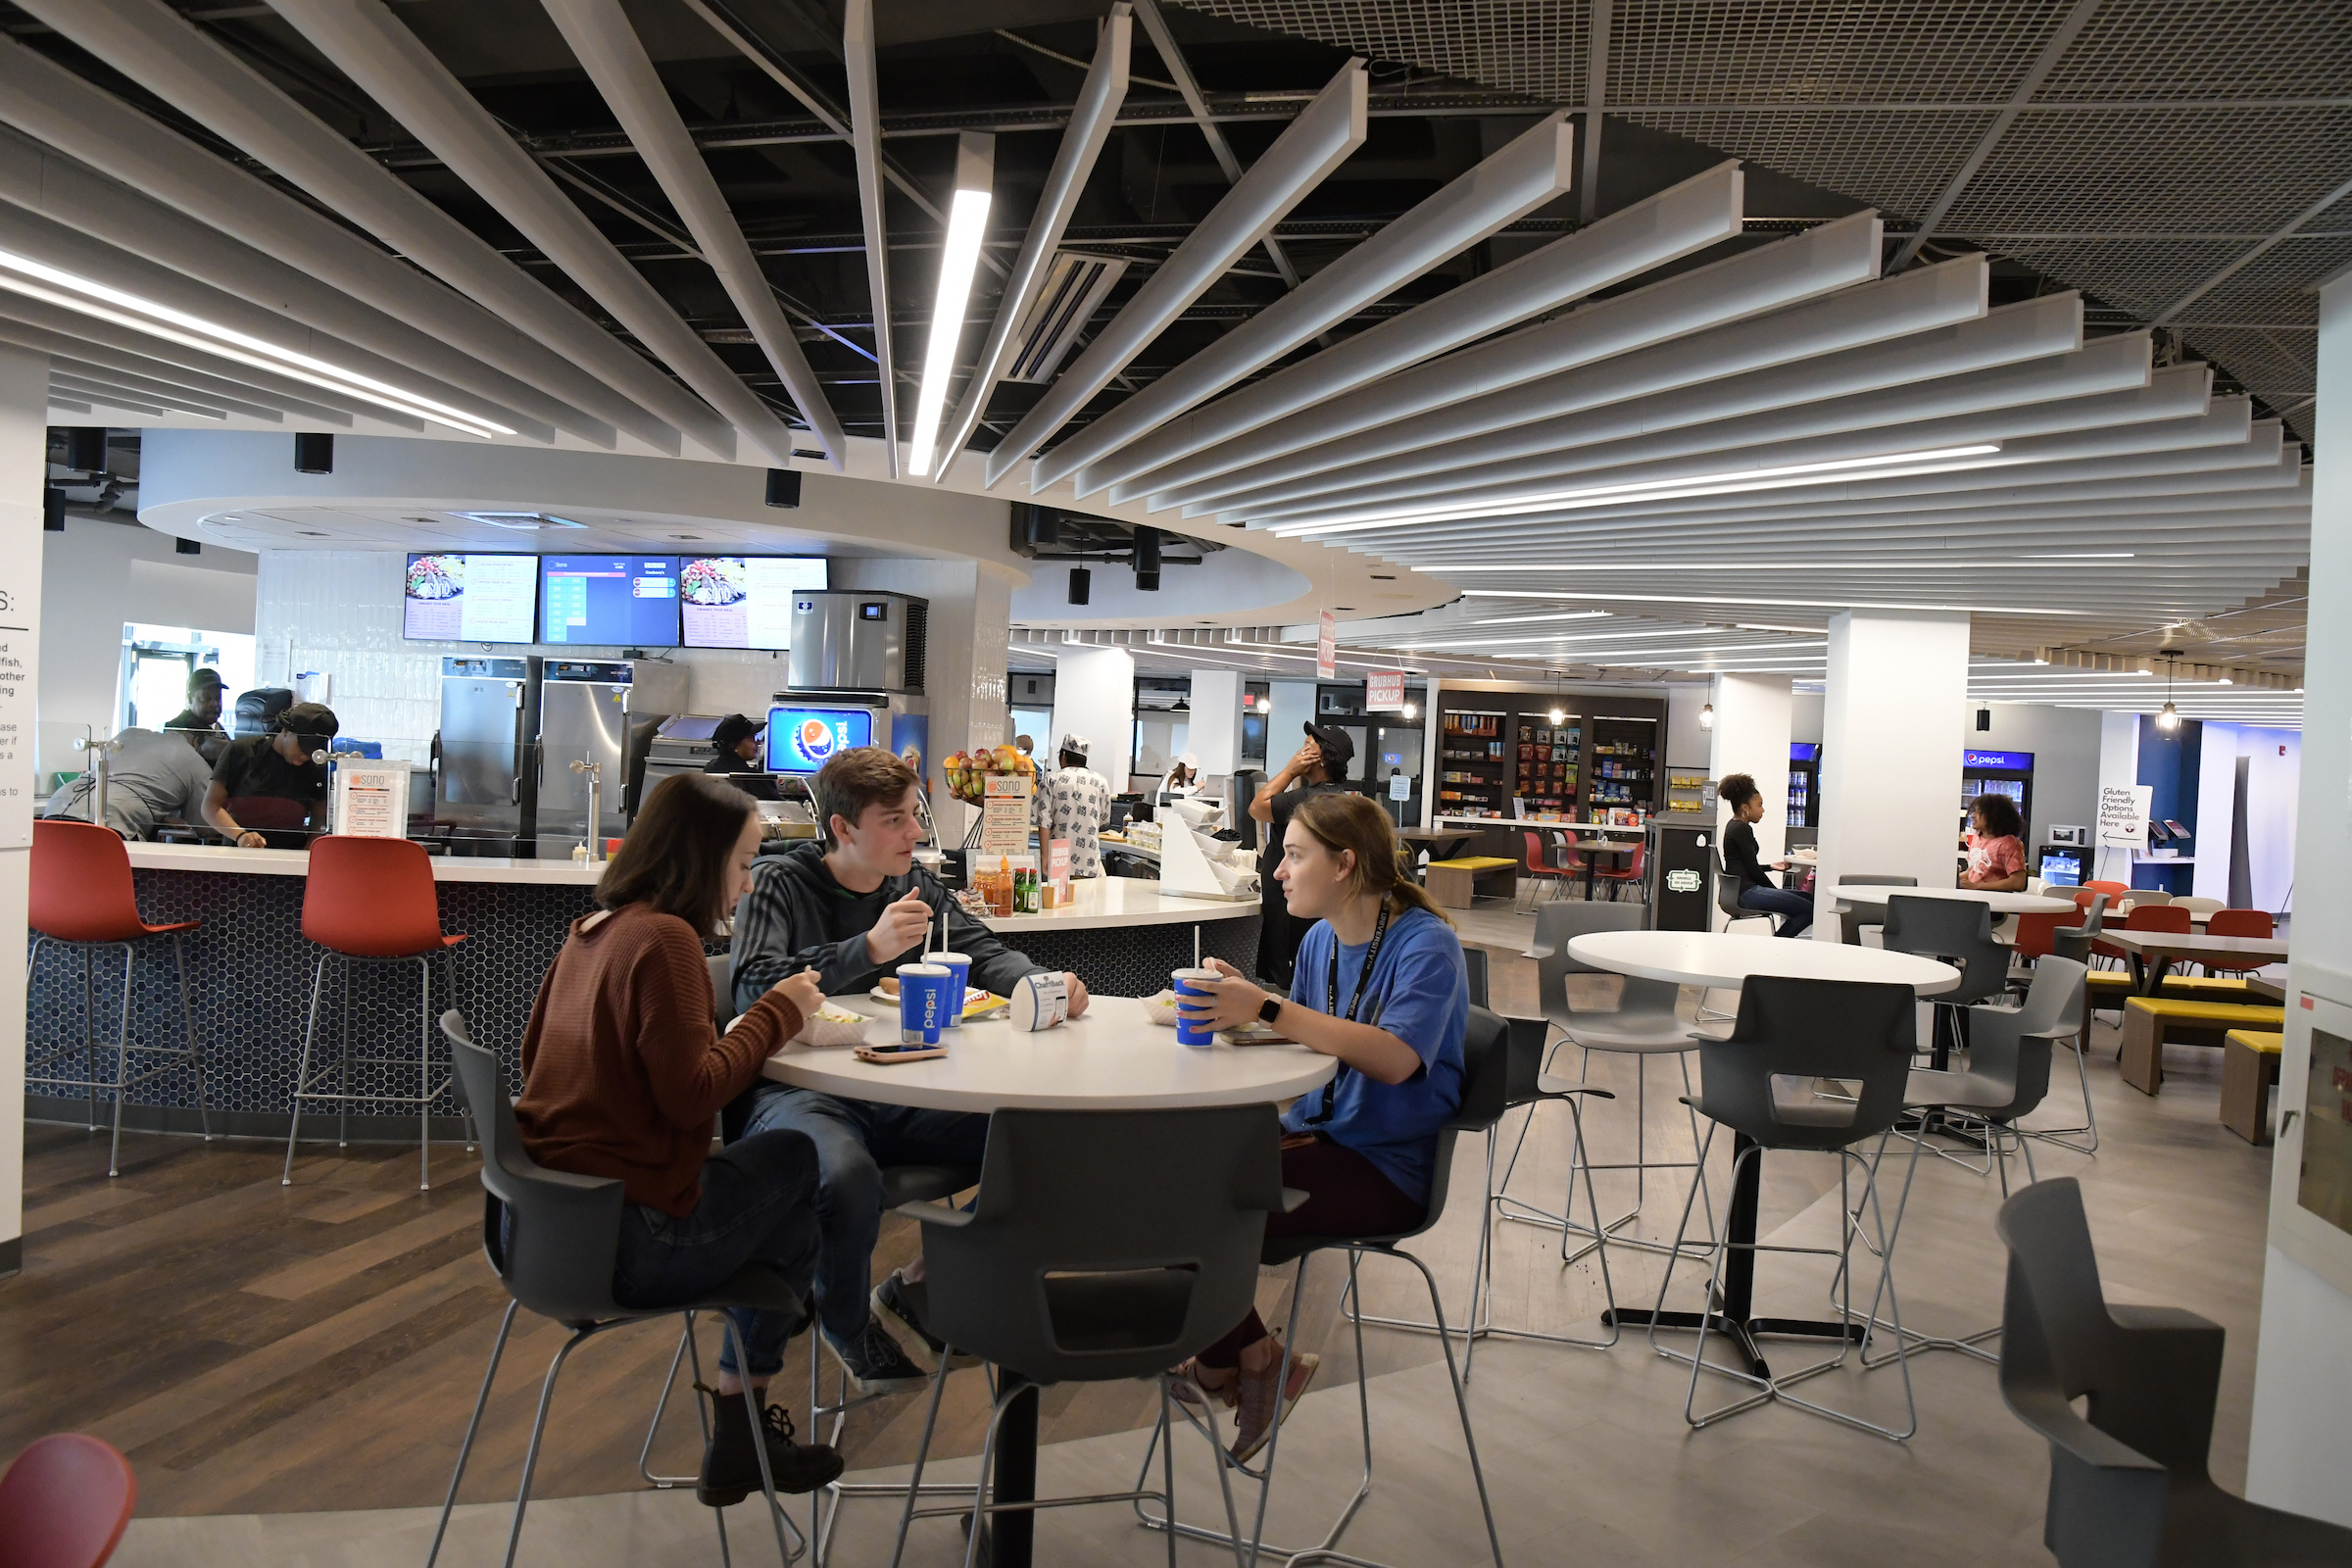 Students eat in dining facilities